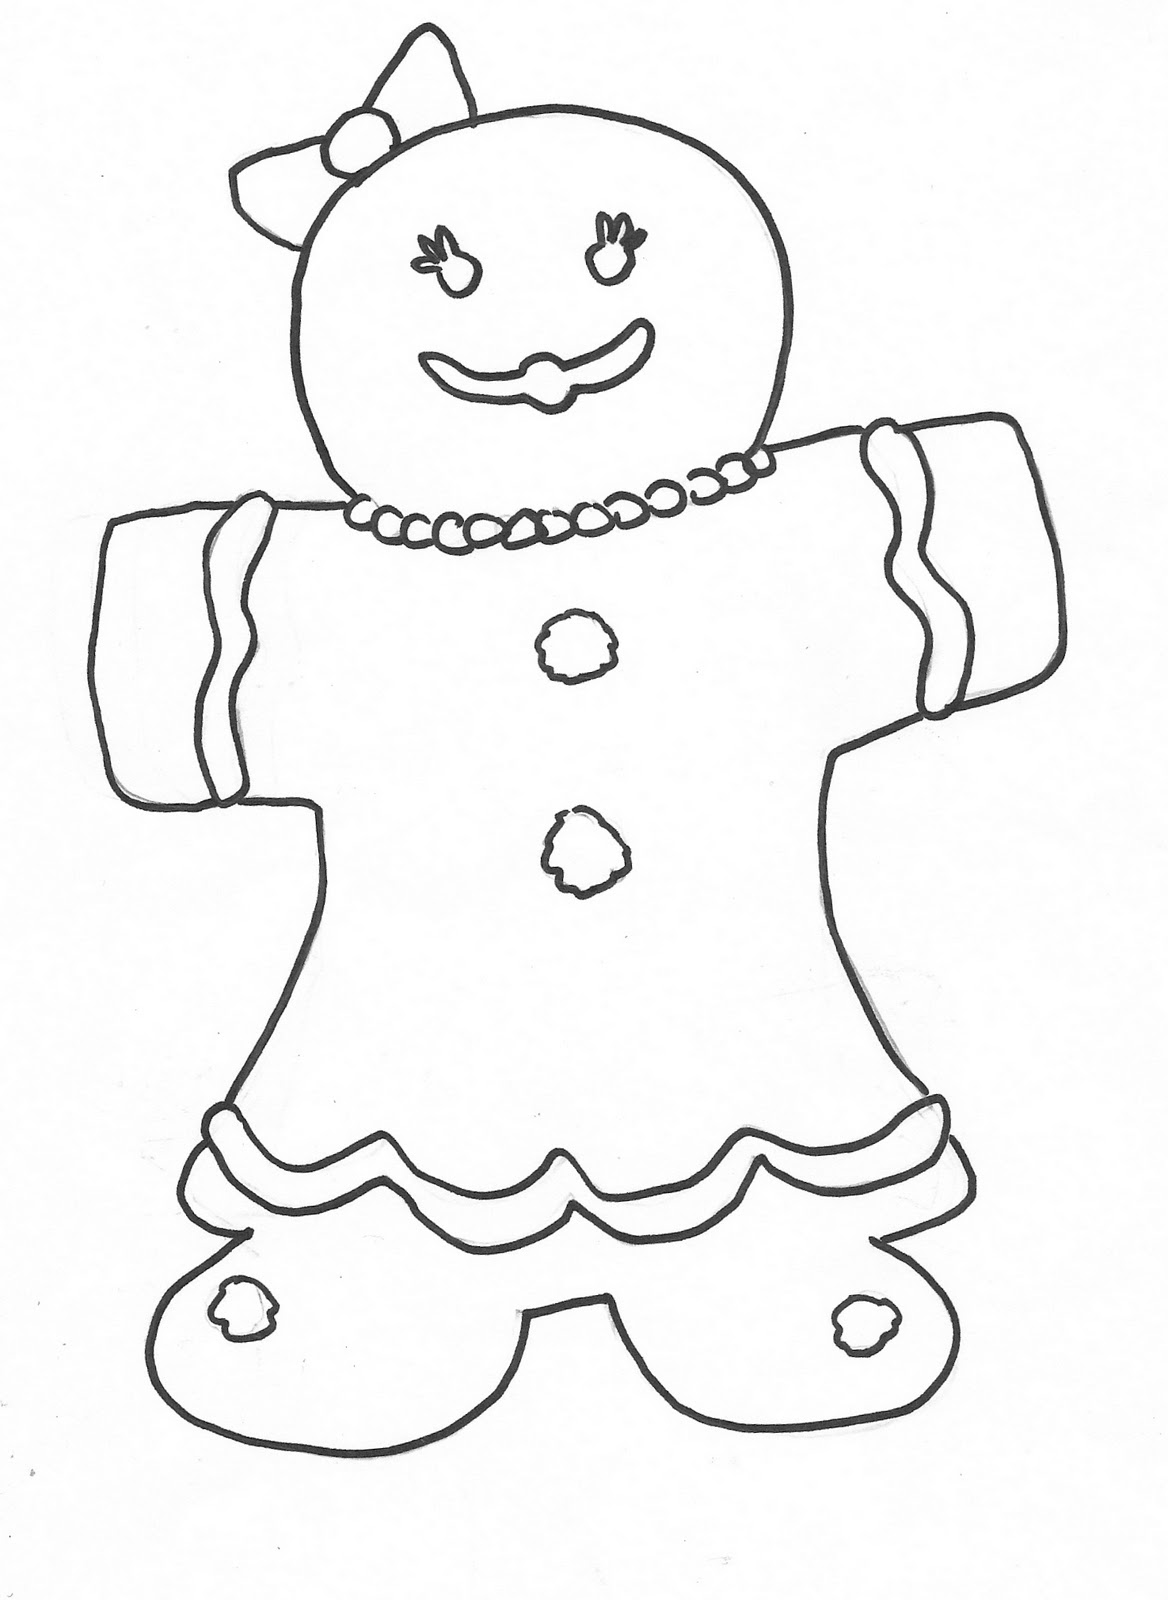 coloring-pages-gingerbread-girl-at-getcolorings-free-printable-colorings-pages-to-print